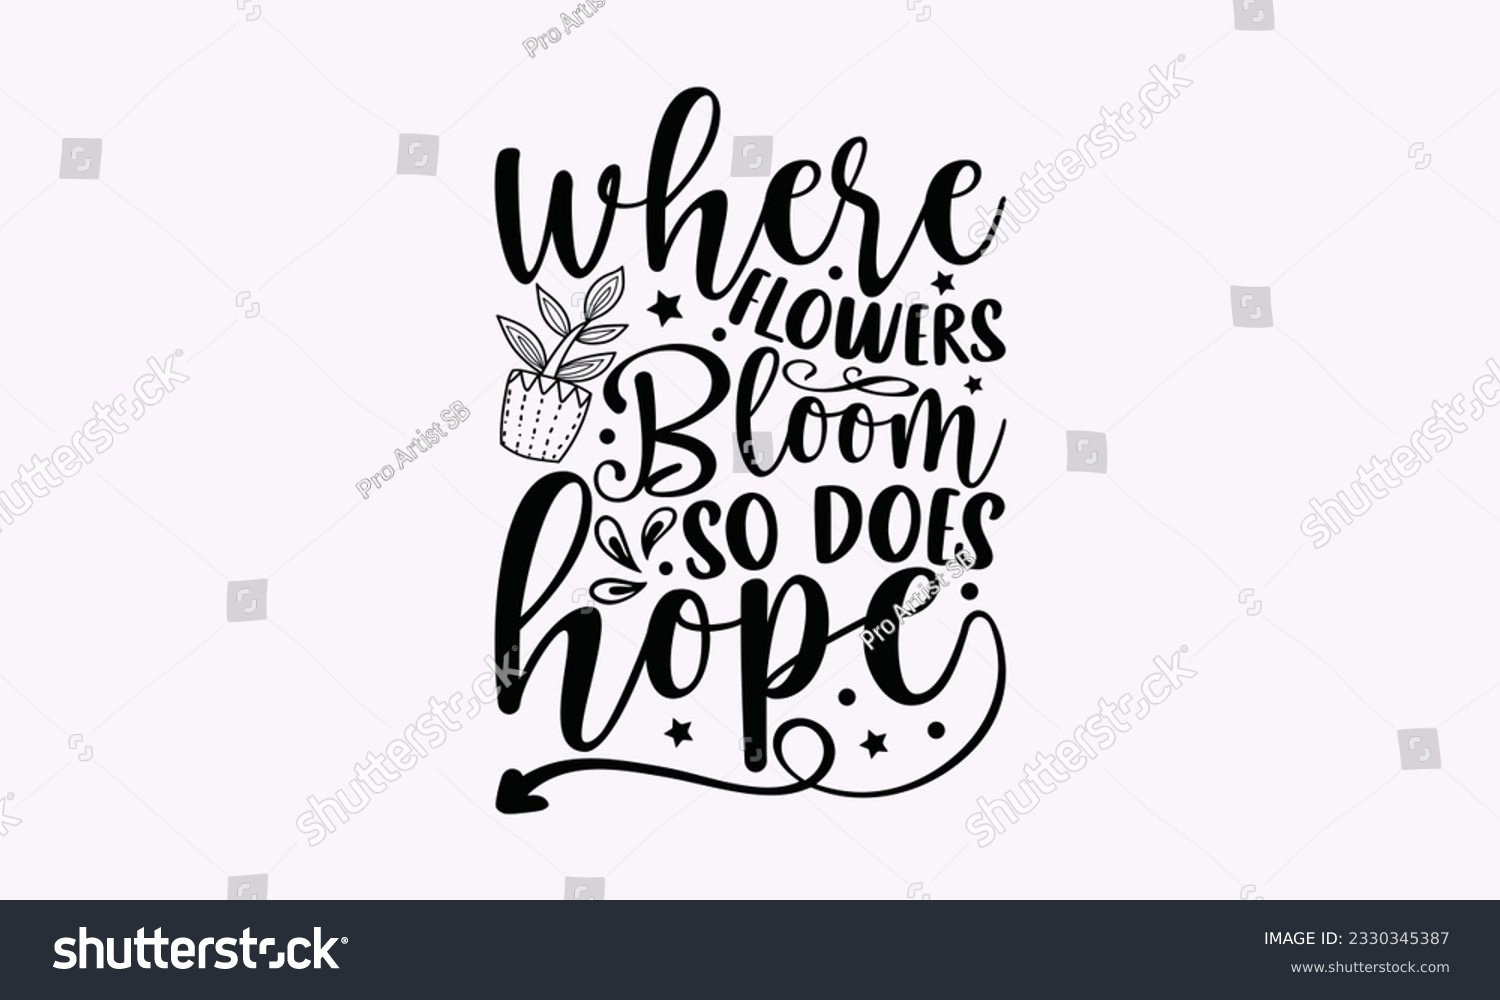 SVG of Where flowers bloom so does hope - Gardening SVG Design, Flower Quotes, Calligraphy graphic design, Typography poster with old style camera and quote. svg